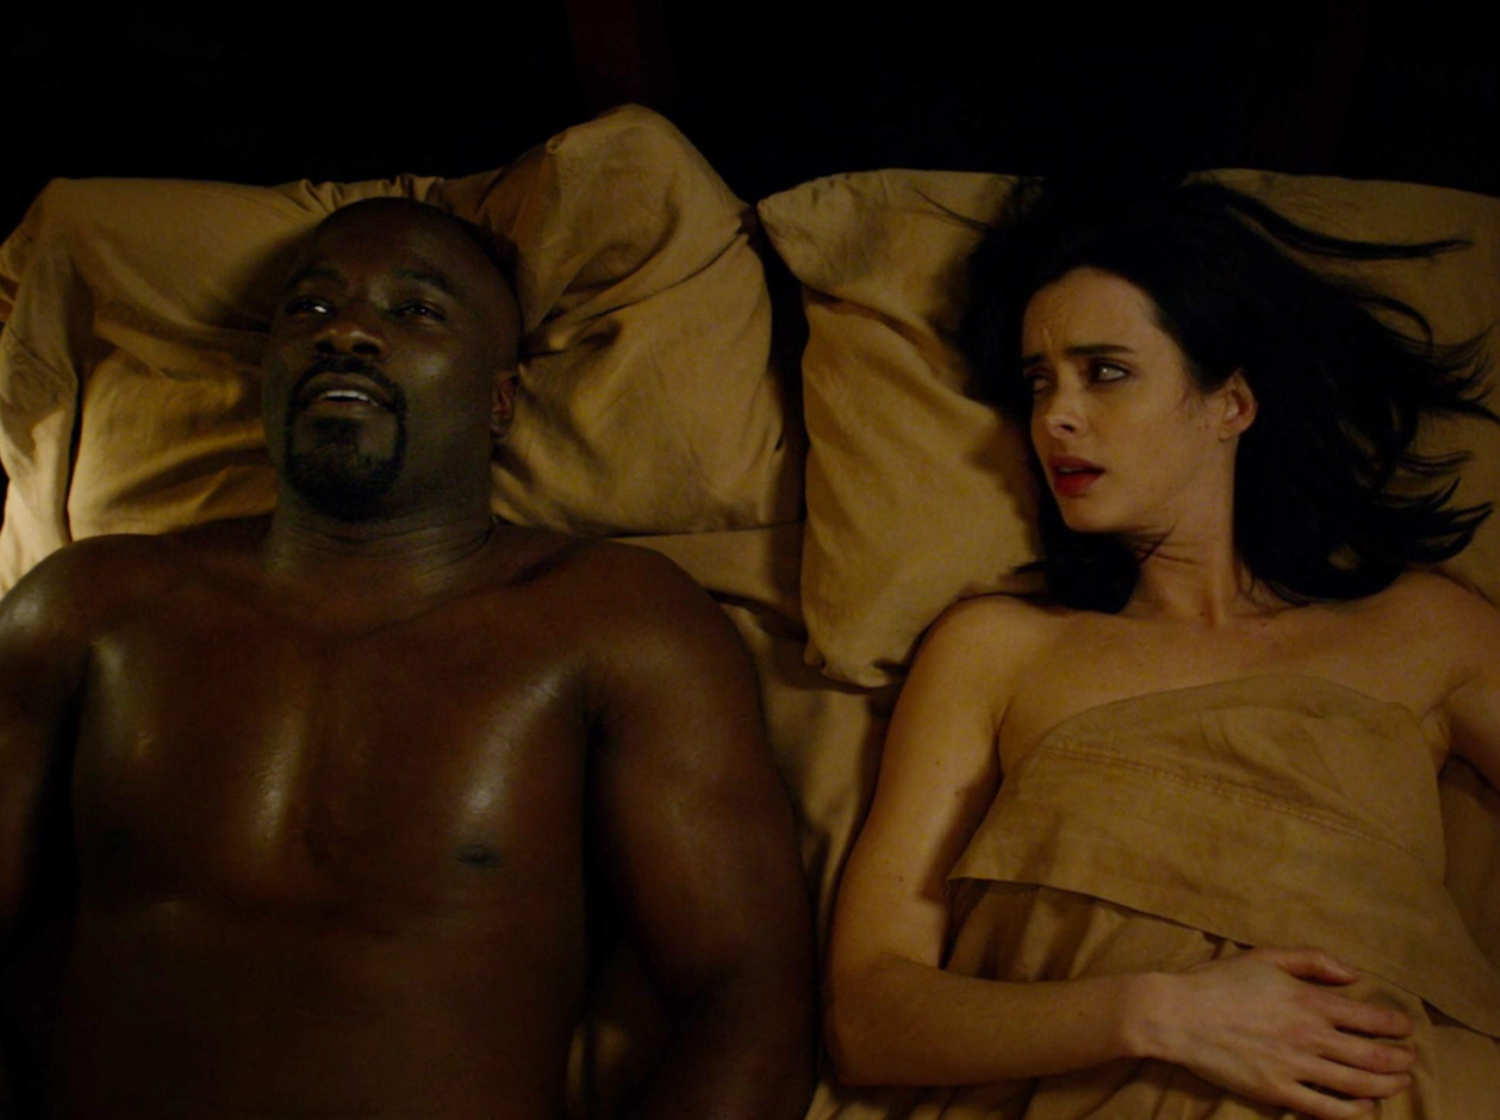 Jessica Jones and Luke Cage (Mike Colter) after some fun in "Jessica Jones." (Vulture)